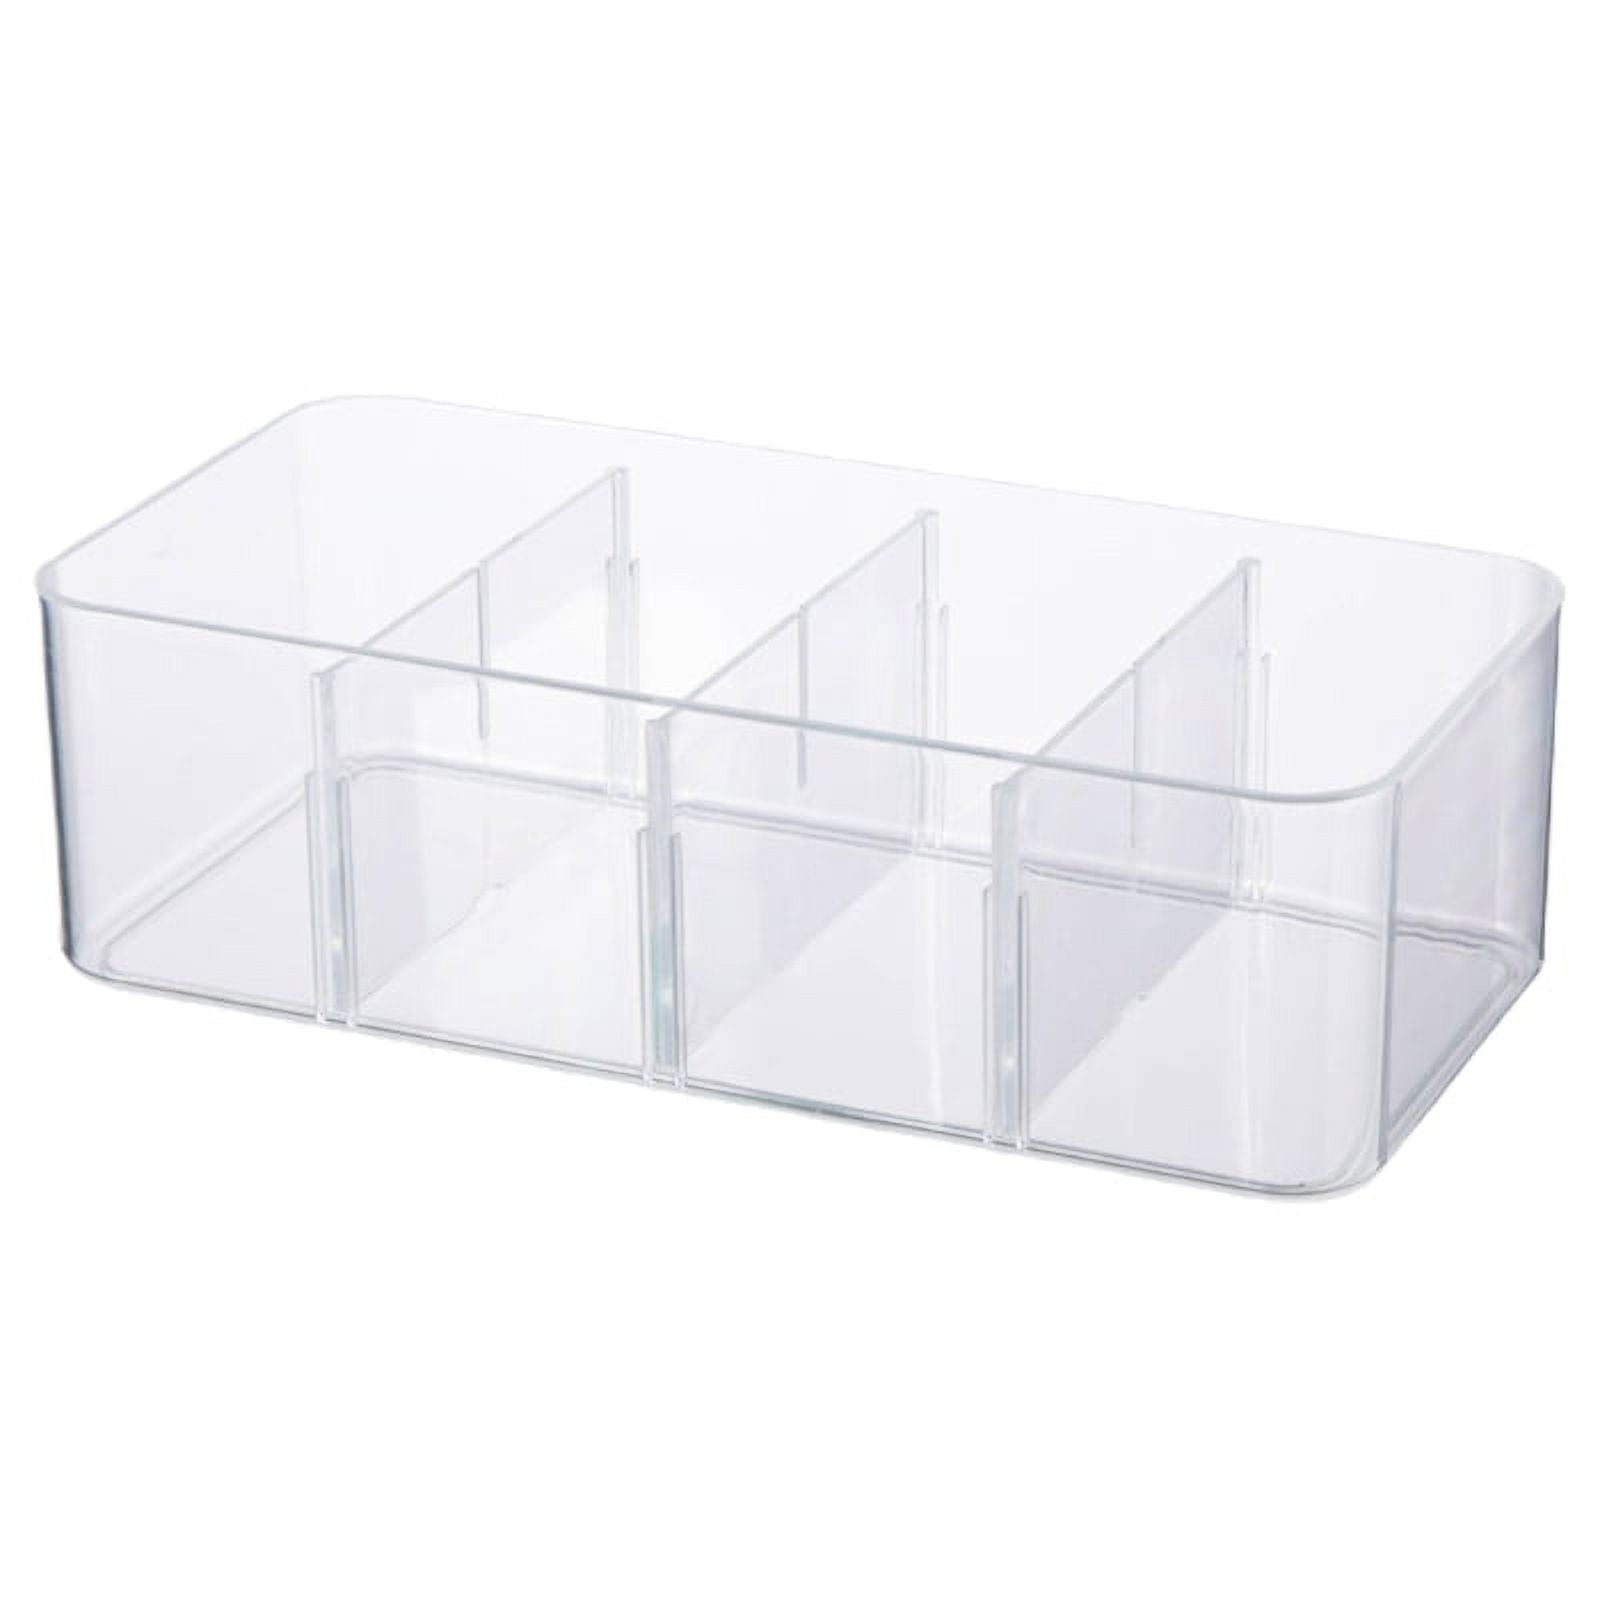  MIOINEY Compartment Storage Box 72 Grids Acrylic